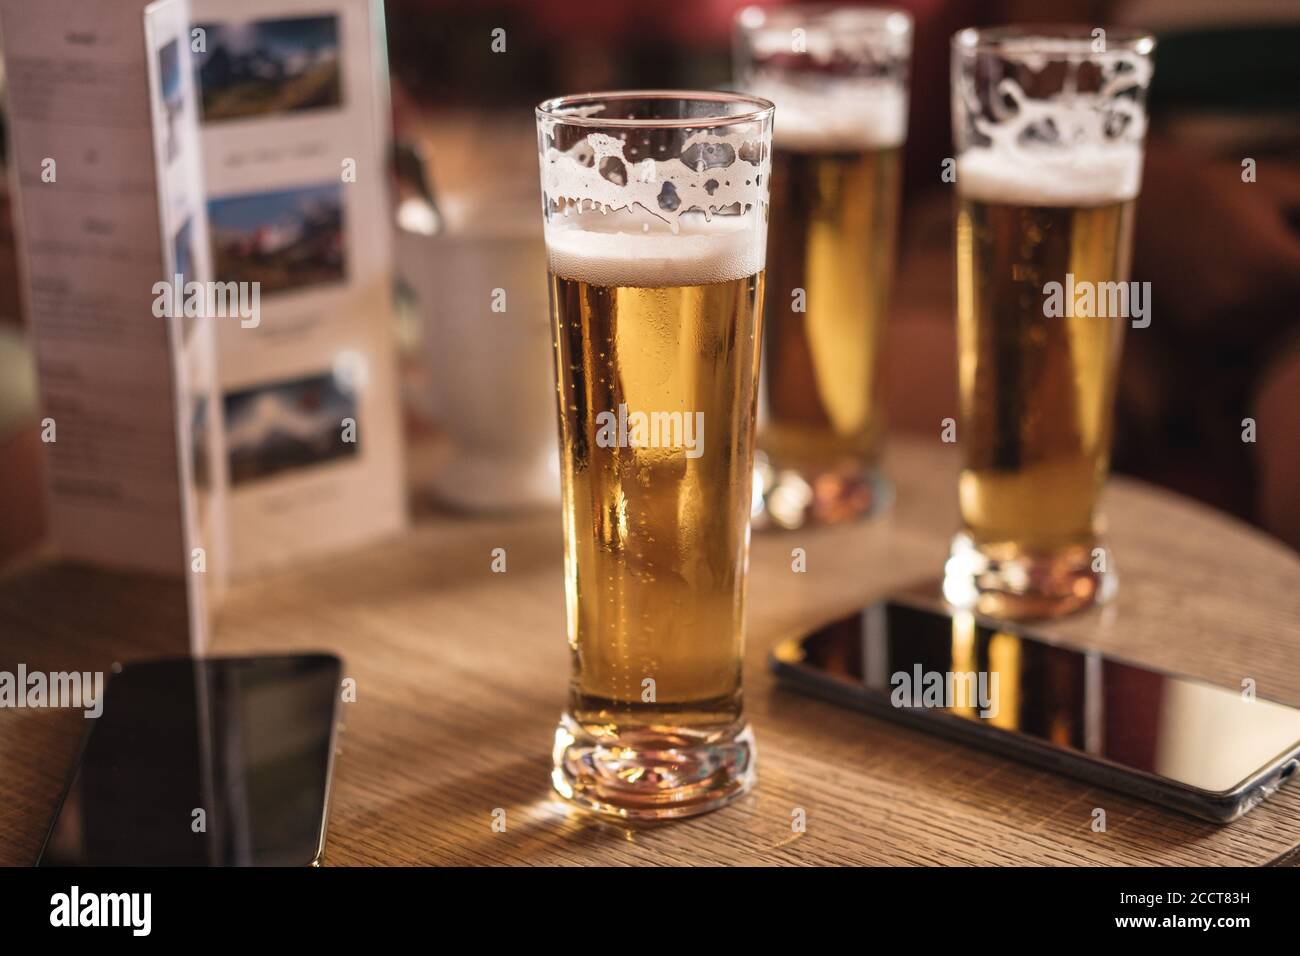 A wooden table in a pub or bar with 3 glasses of gold colored foamy beer and 2 mobile phones. no visible people Stock Photo